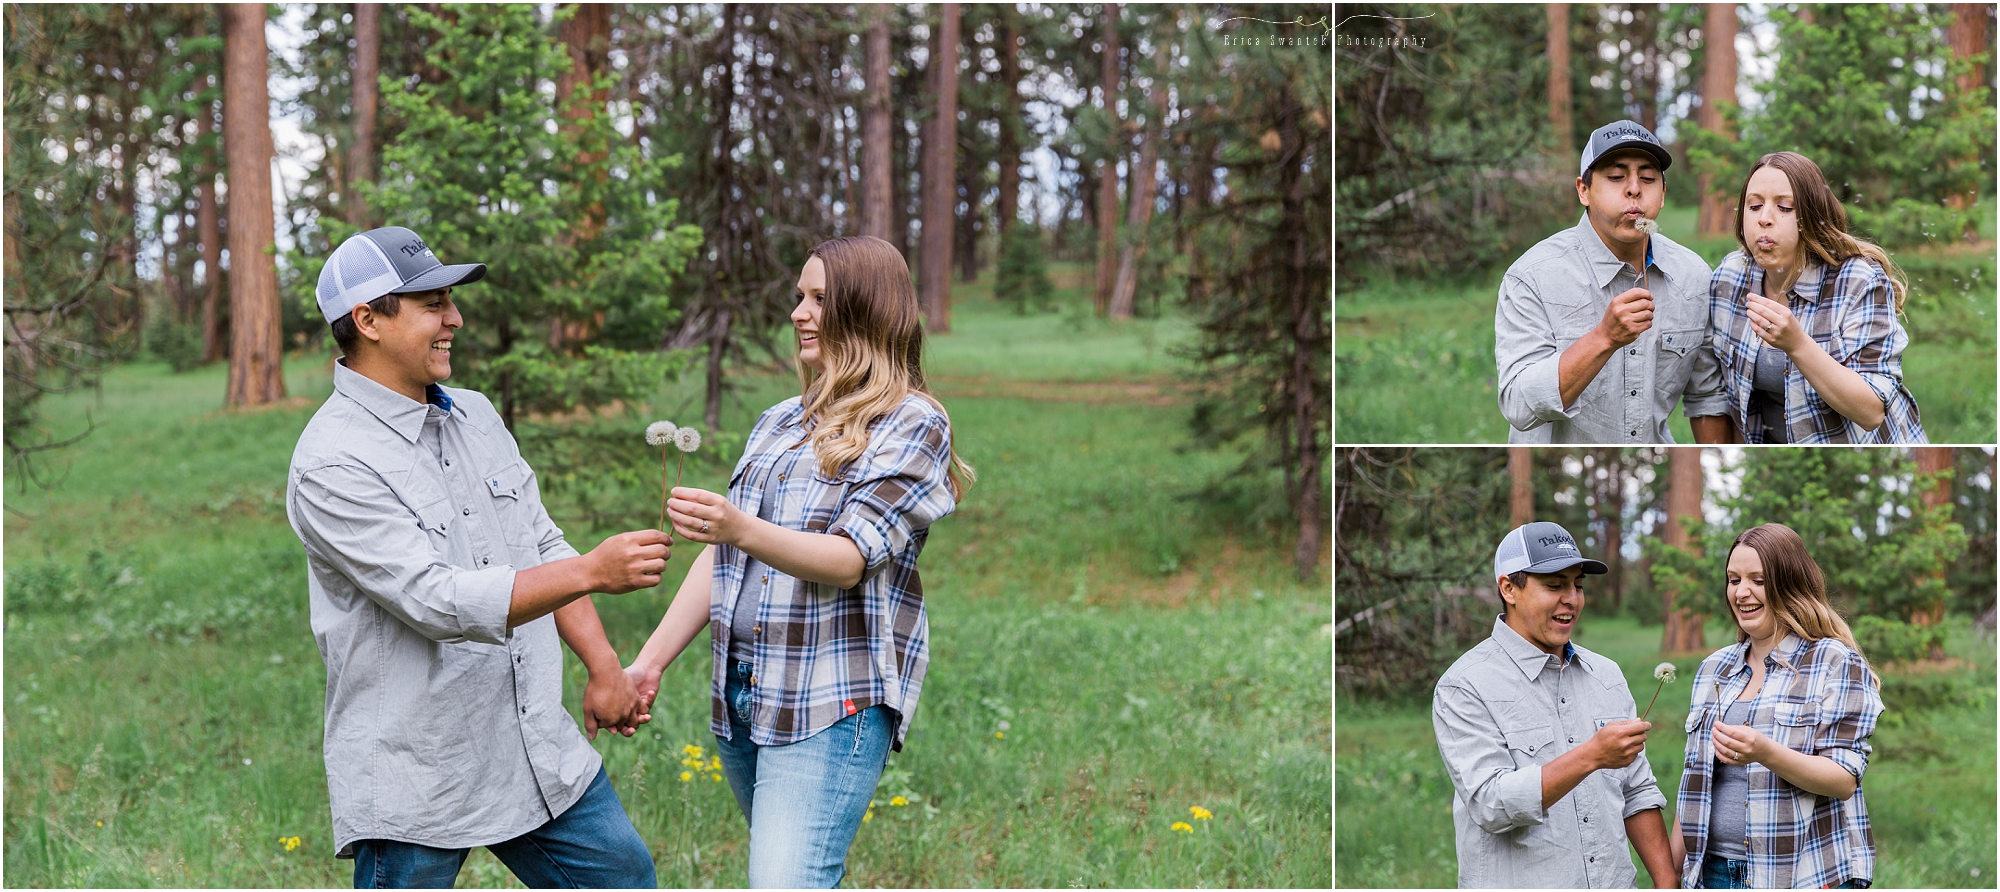 An outdoor loving couple makes a dandelion wish at their campfire themed engagement photo session near Bend, Oregon. | Erica Swantek Photography